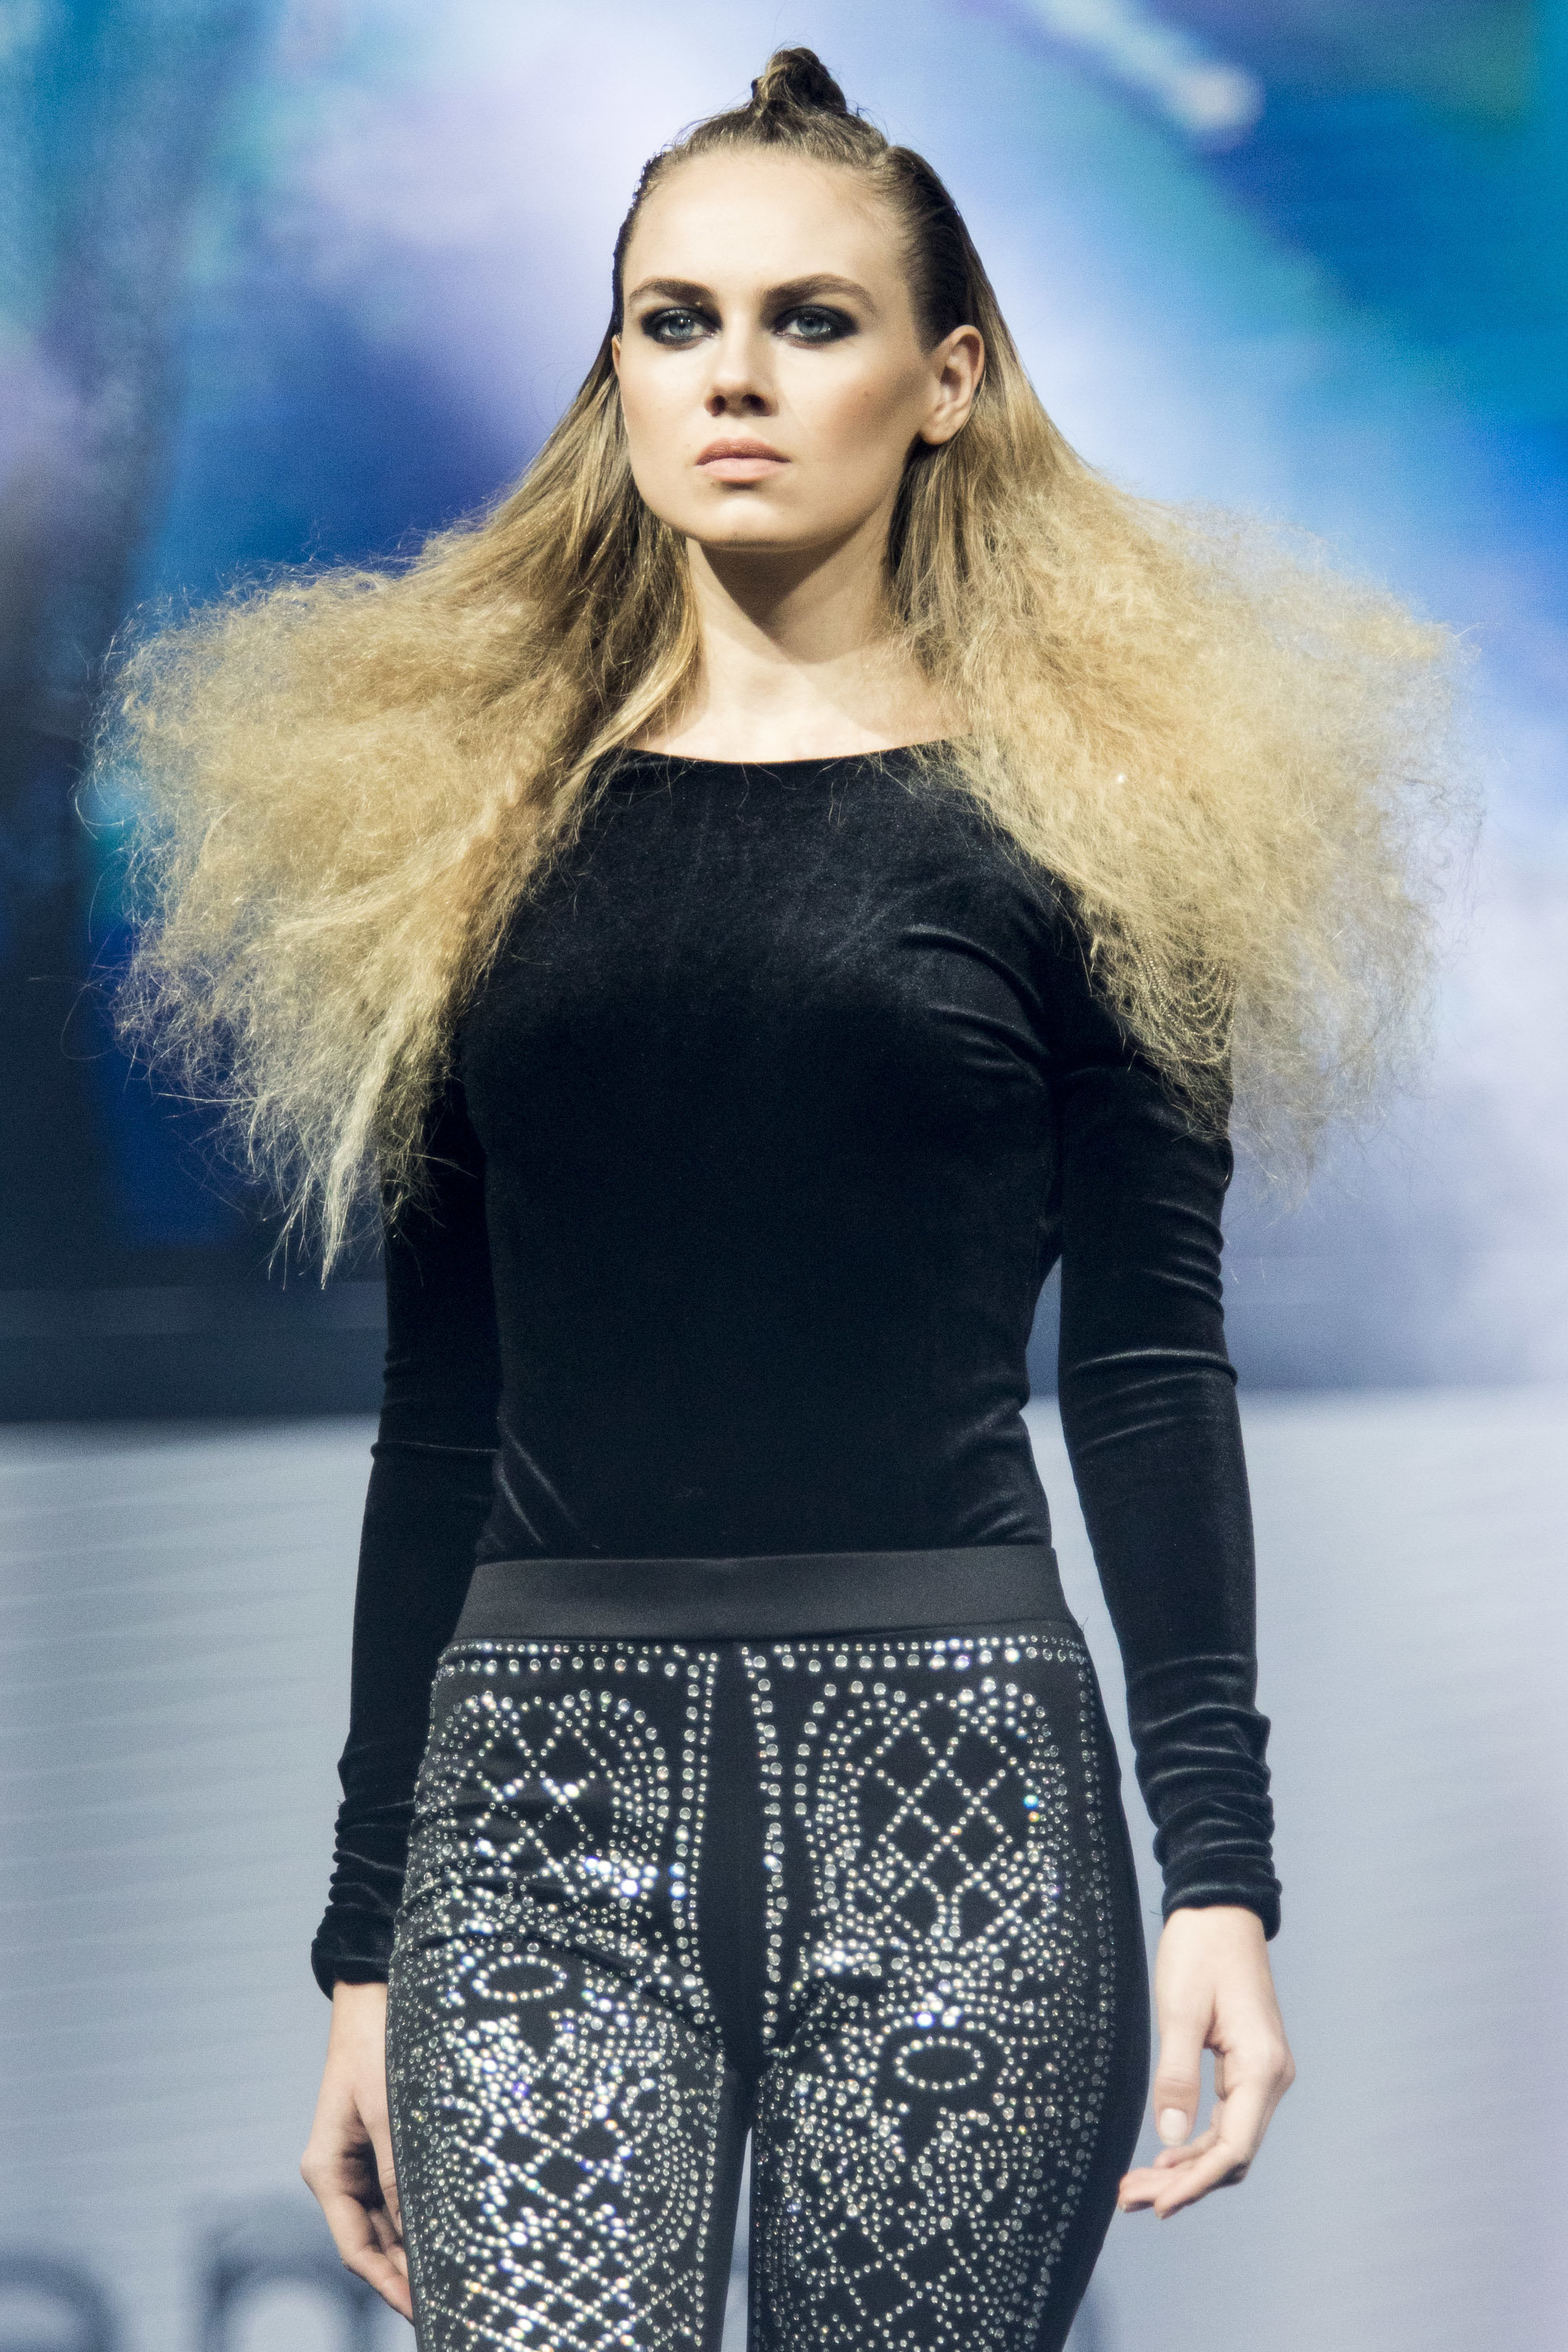 Top 8 Causes of Frizzy Hair  NaturallyCurlycom